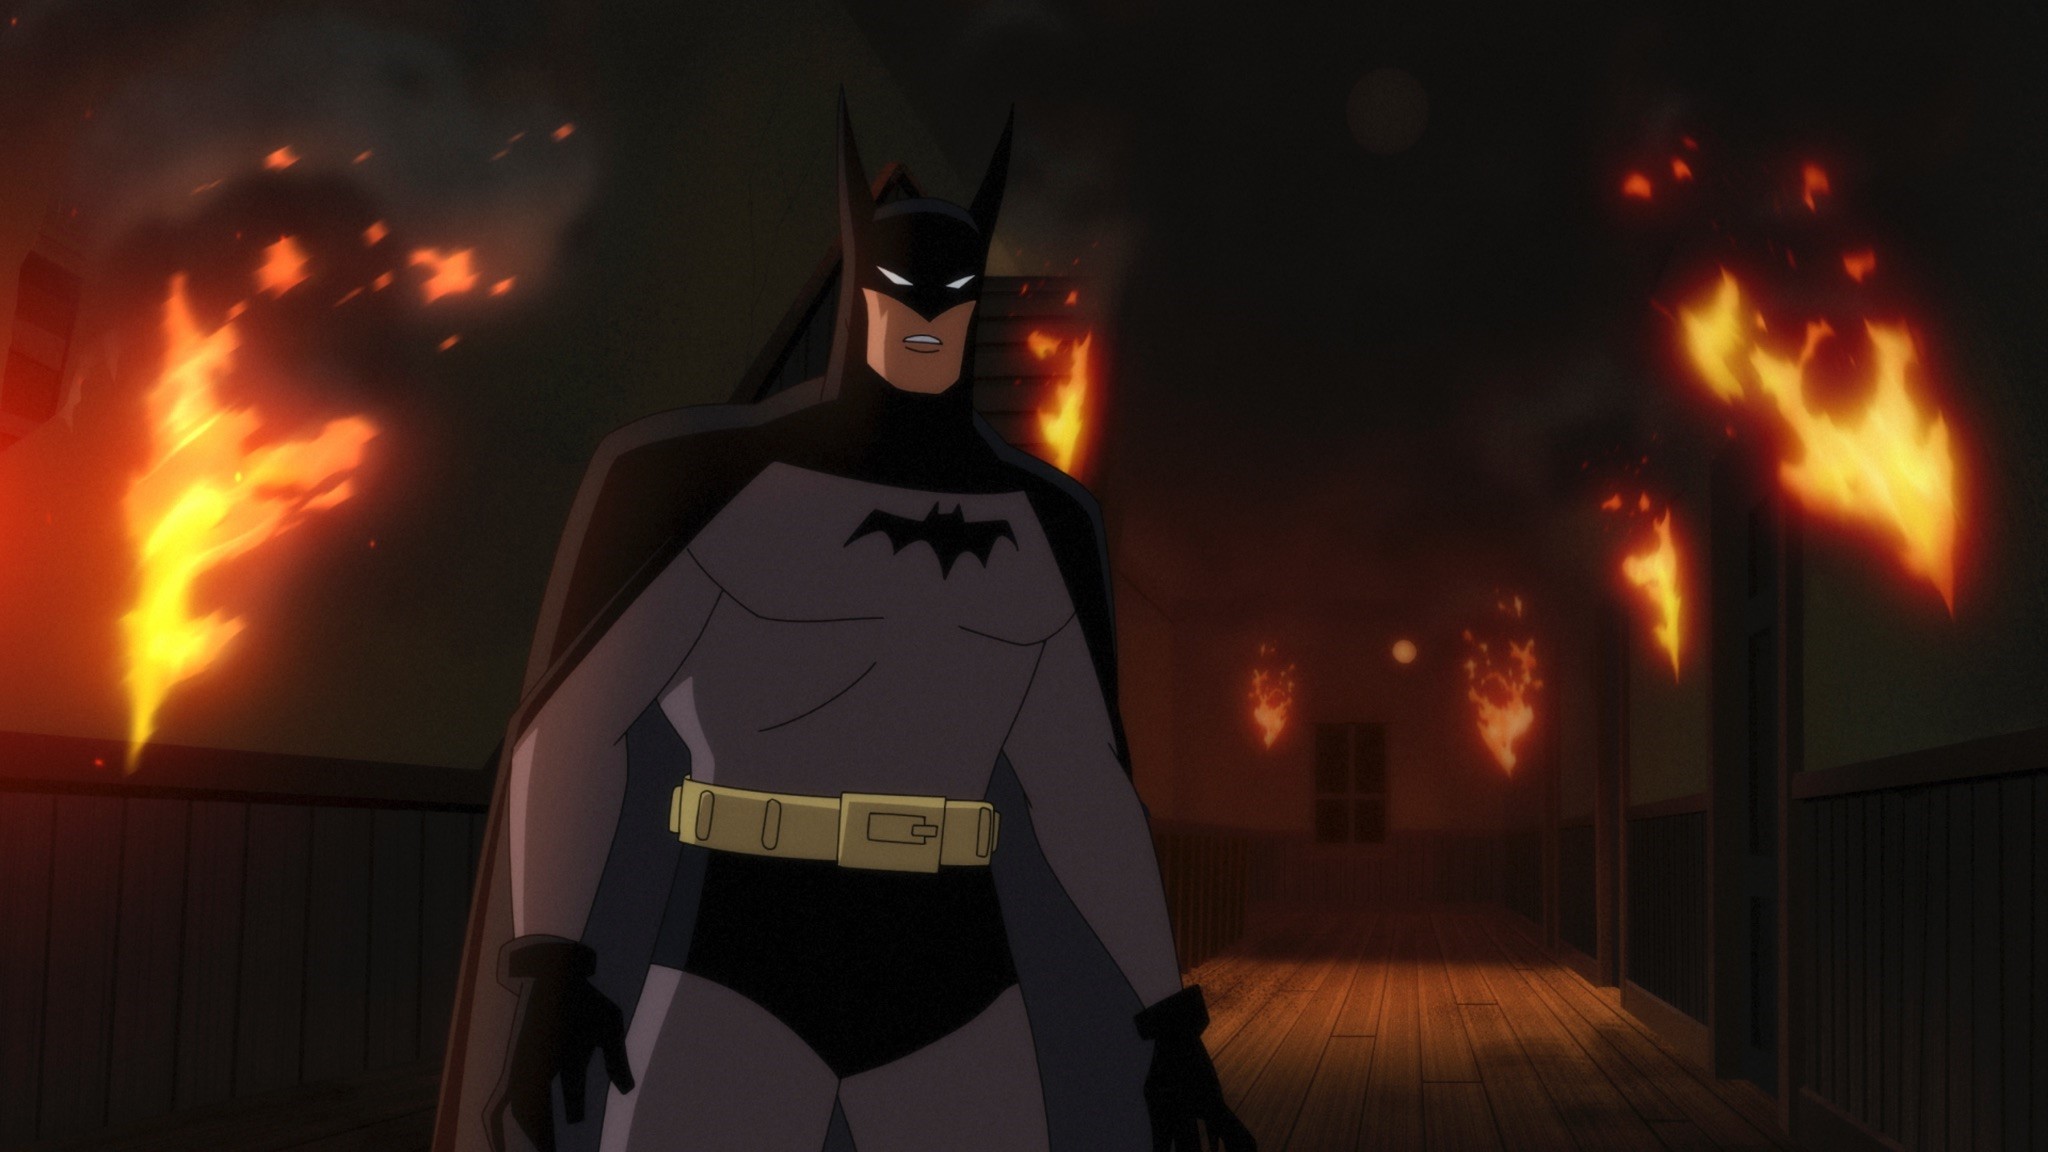 Welcome to Gotham City! Prime Video Releases First-Look Images and Announces Premiere Date For New Animated Series Batman: Caped Crusader